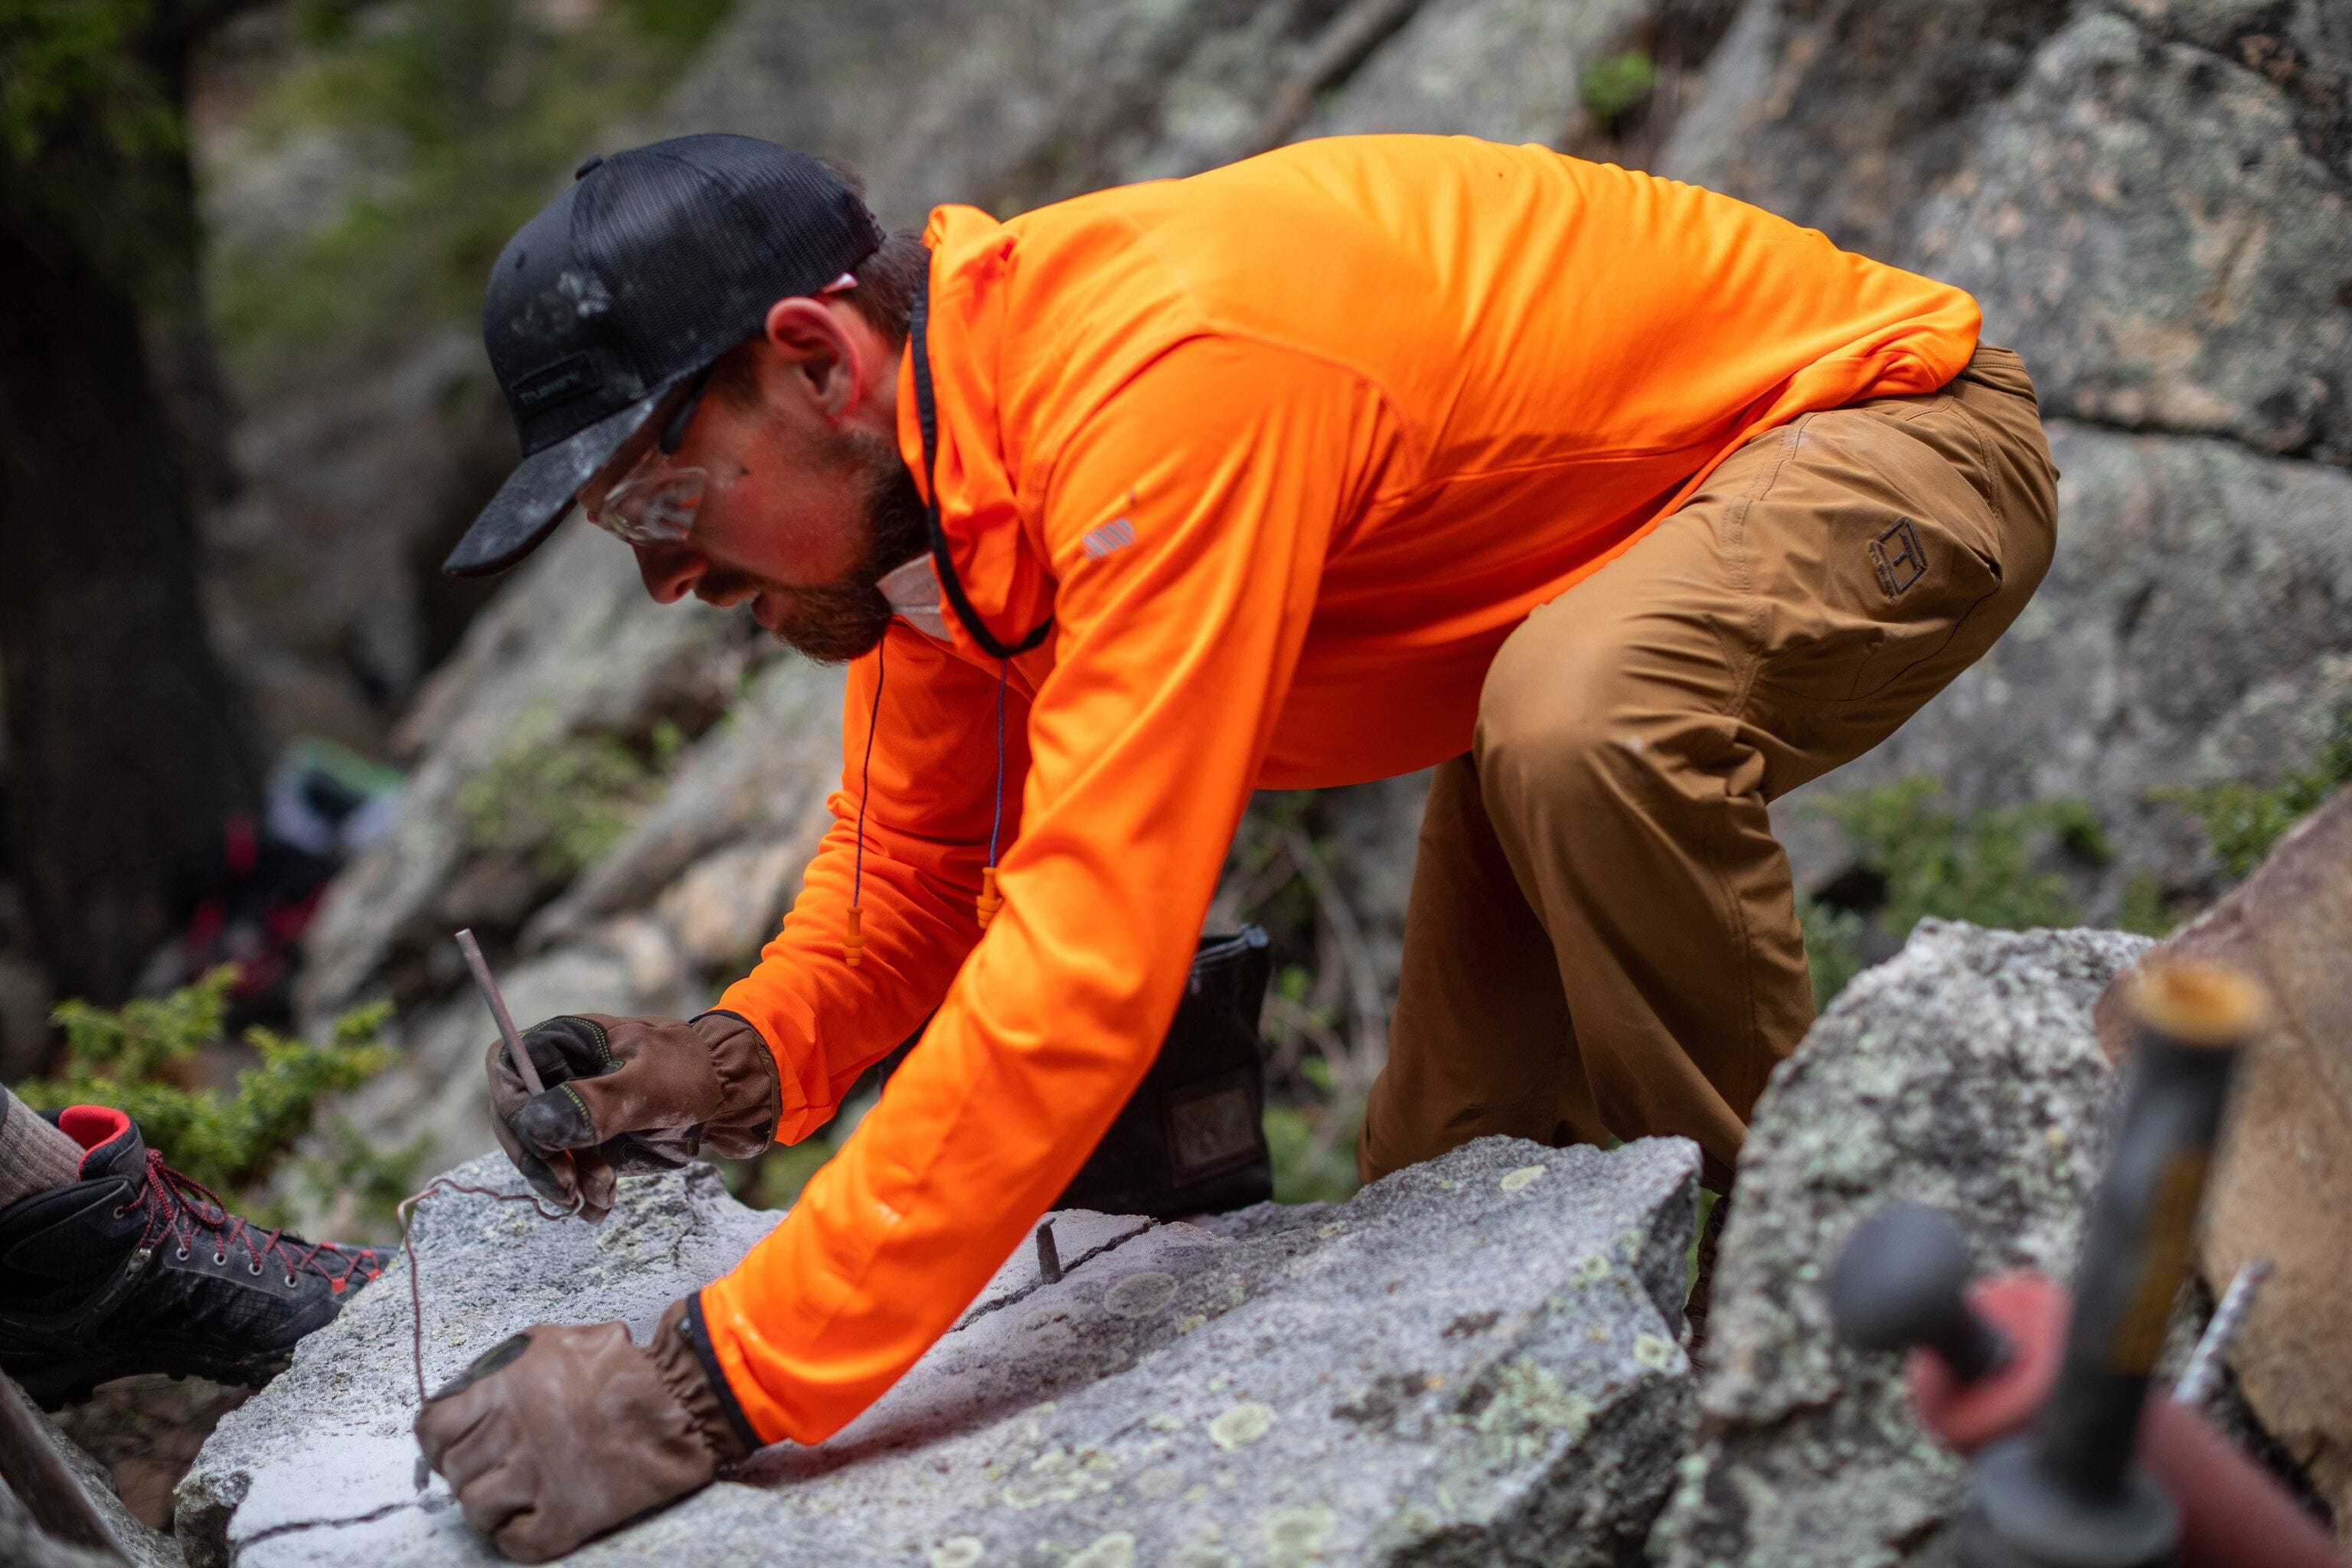 A technician at Little Eden wears orange and tan Truewerk workwear and leans over a boulder as he works on a project.